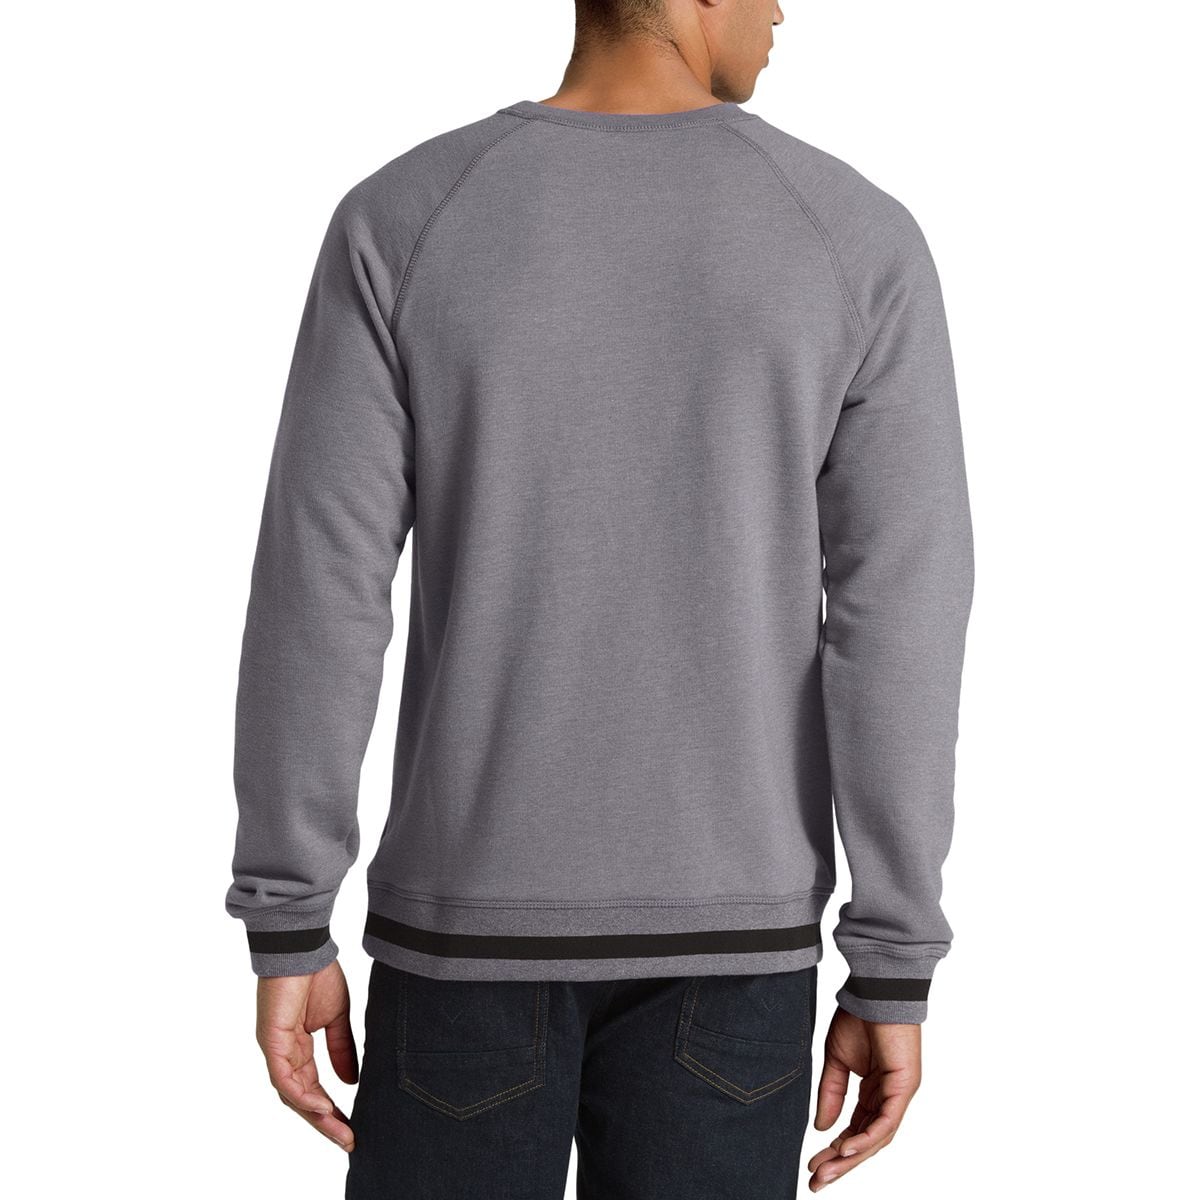 The North Face High Trail Sweatshirt - Men's - Clothing